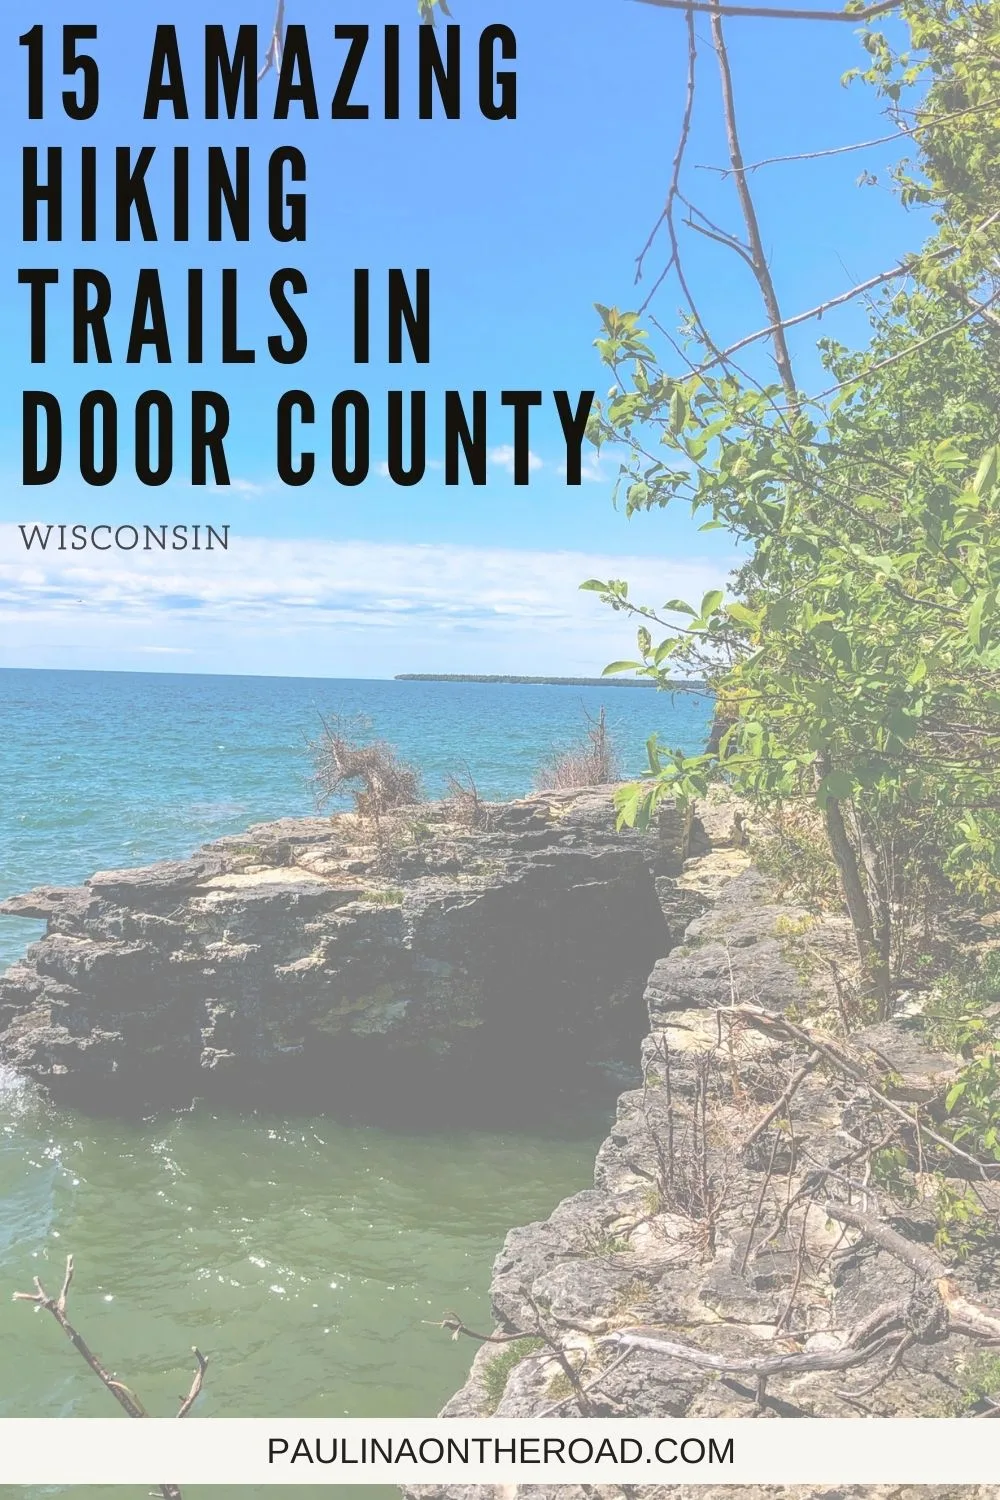 Looking to get out and about to go hiking in Door County? This guide has all the best hikes in Door County for any level of hiker. It includes the top Sturgeon Bay hiking trails, winter hiking trails in Door County and where to go biking and running in Door County. Door County is full of stunning landscapes and great hiking opportunities. #DoorCounty #Wisconsin #Hiking #WisconsinHiking #EagleTrail #WisconsinHikes #DoorCountyWisconsin #GetActive #WhitefishDunesStatePark #AhnapeeTrail